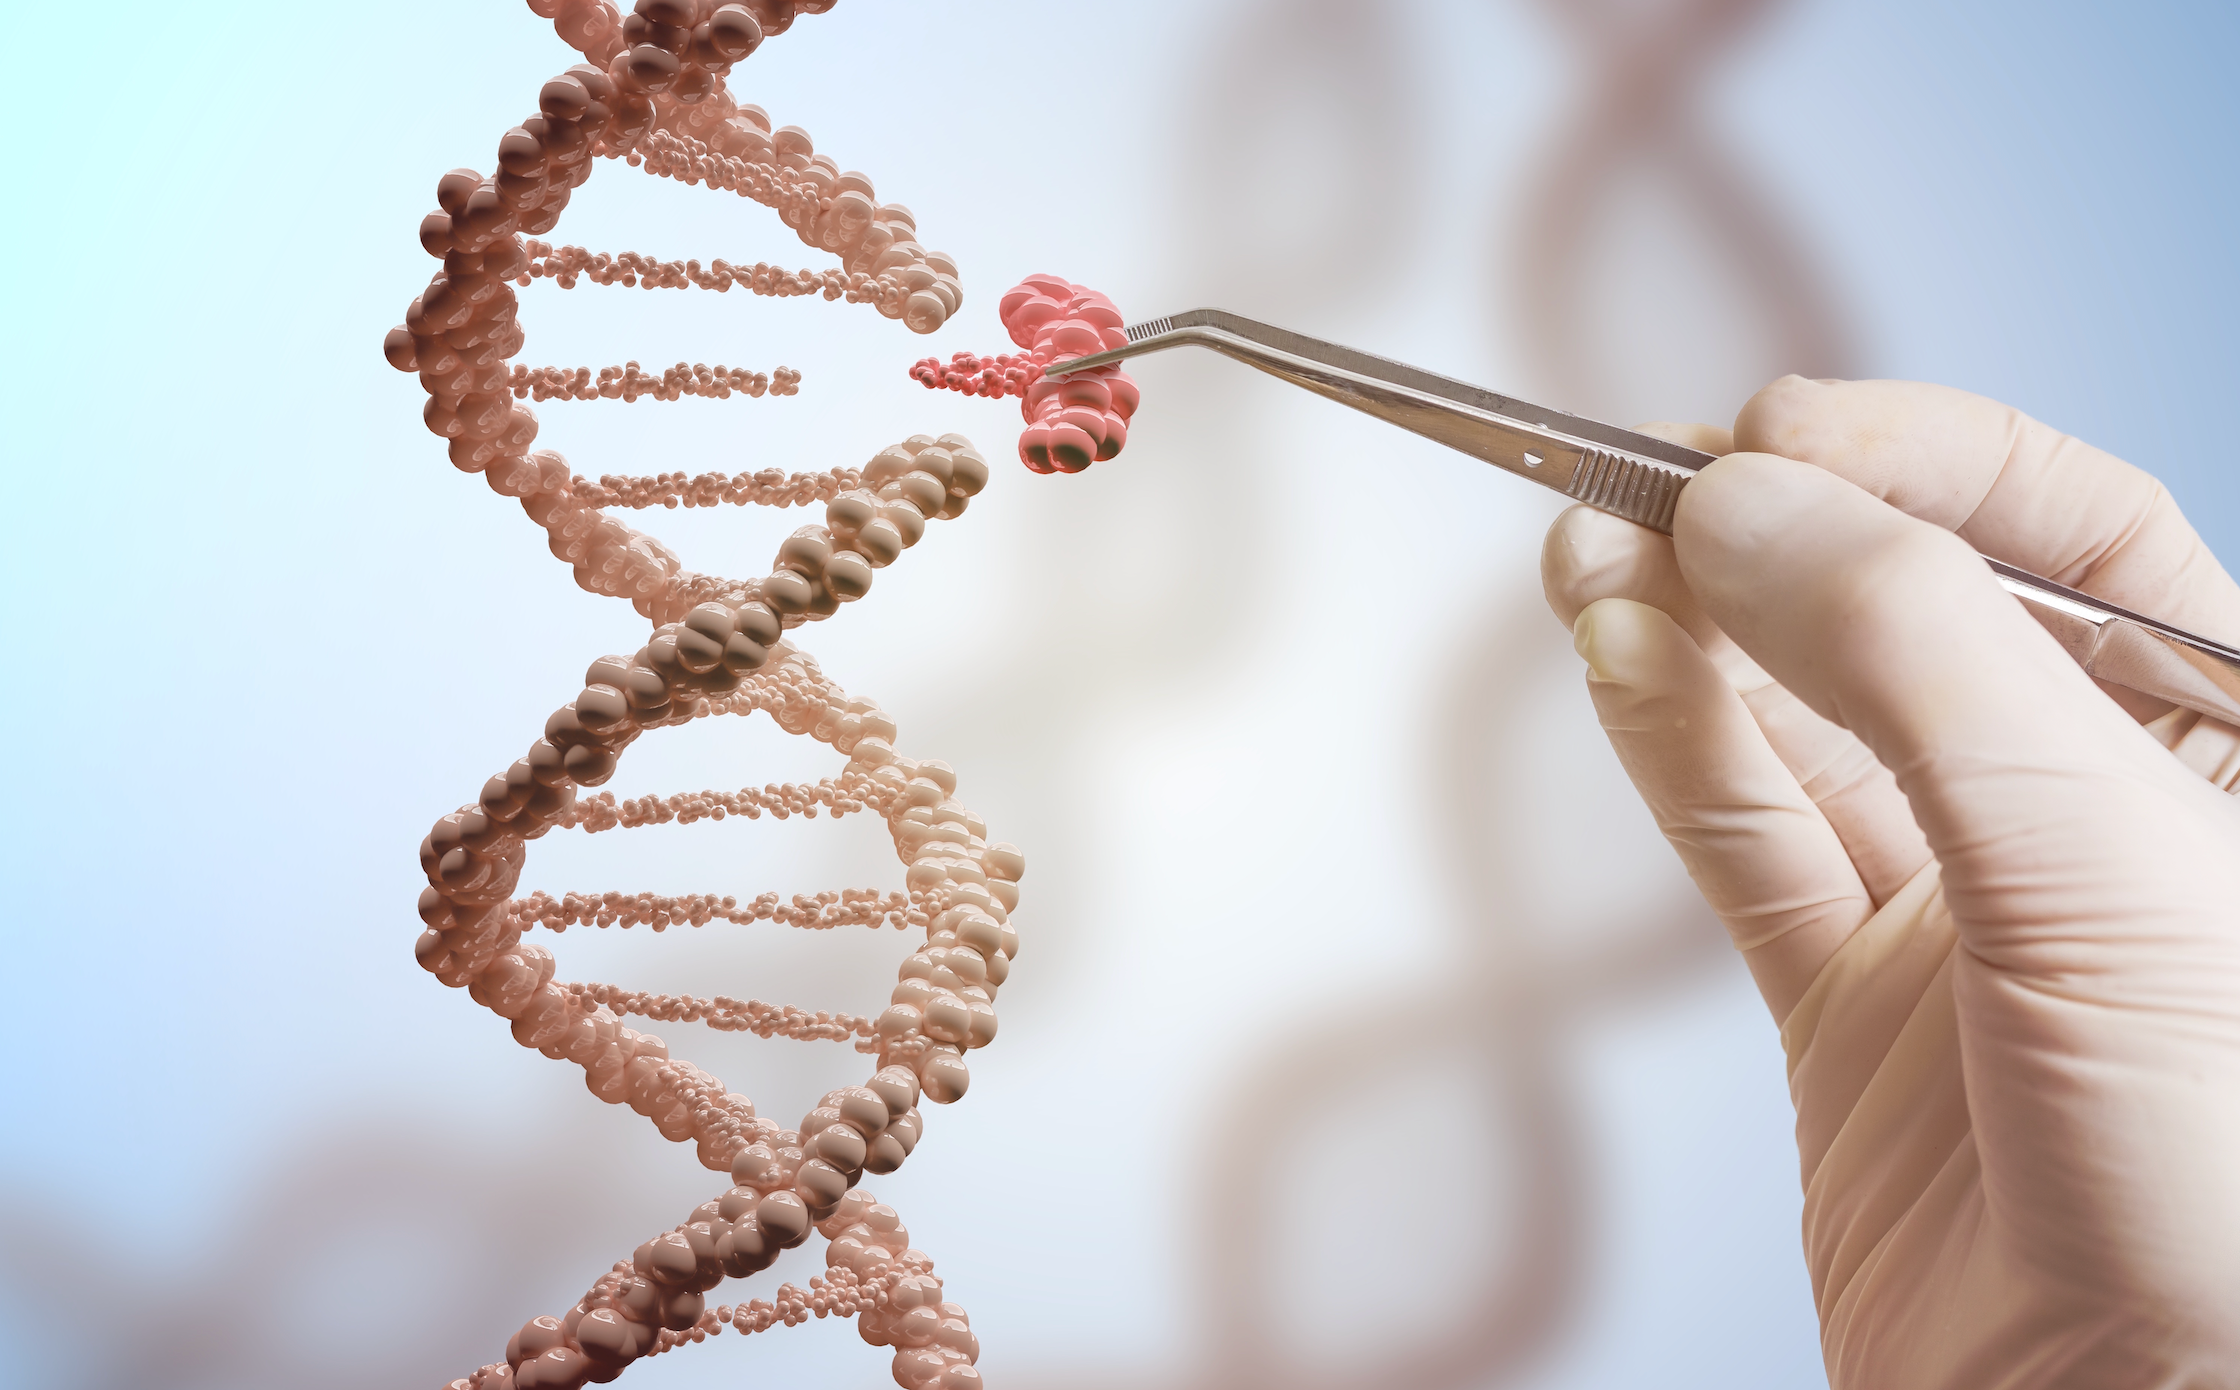 Data for IG-002 show for the first time that a single subretinal administration of a DNA payload encoding the human ABCA4 gene resulted in durable expression of human ABCA4 protein. (Adobe Stock image)